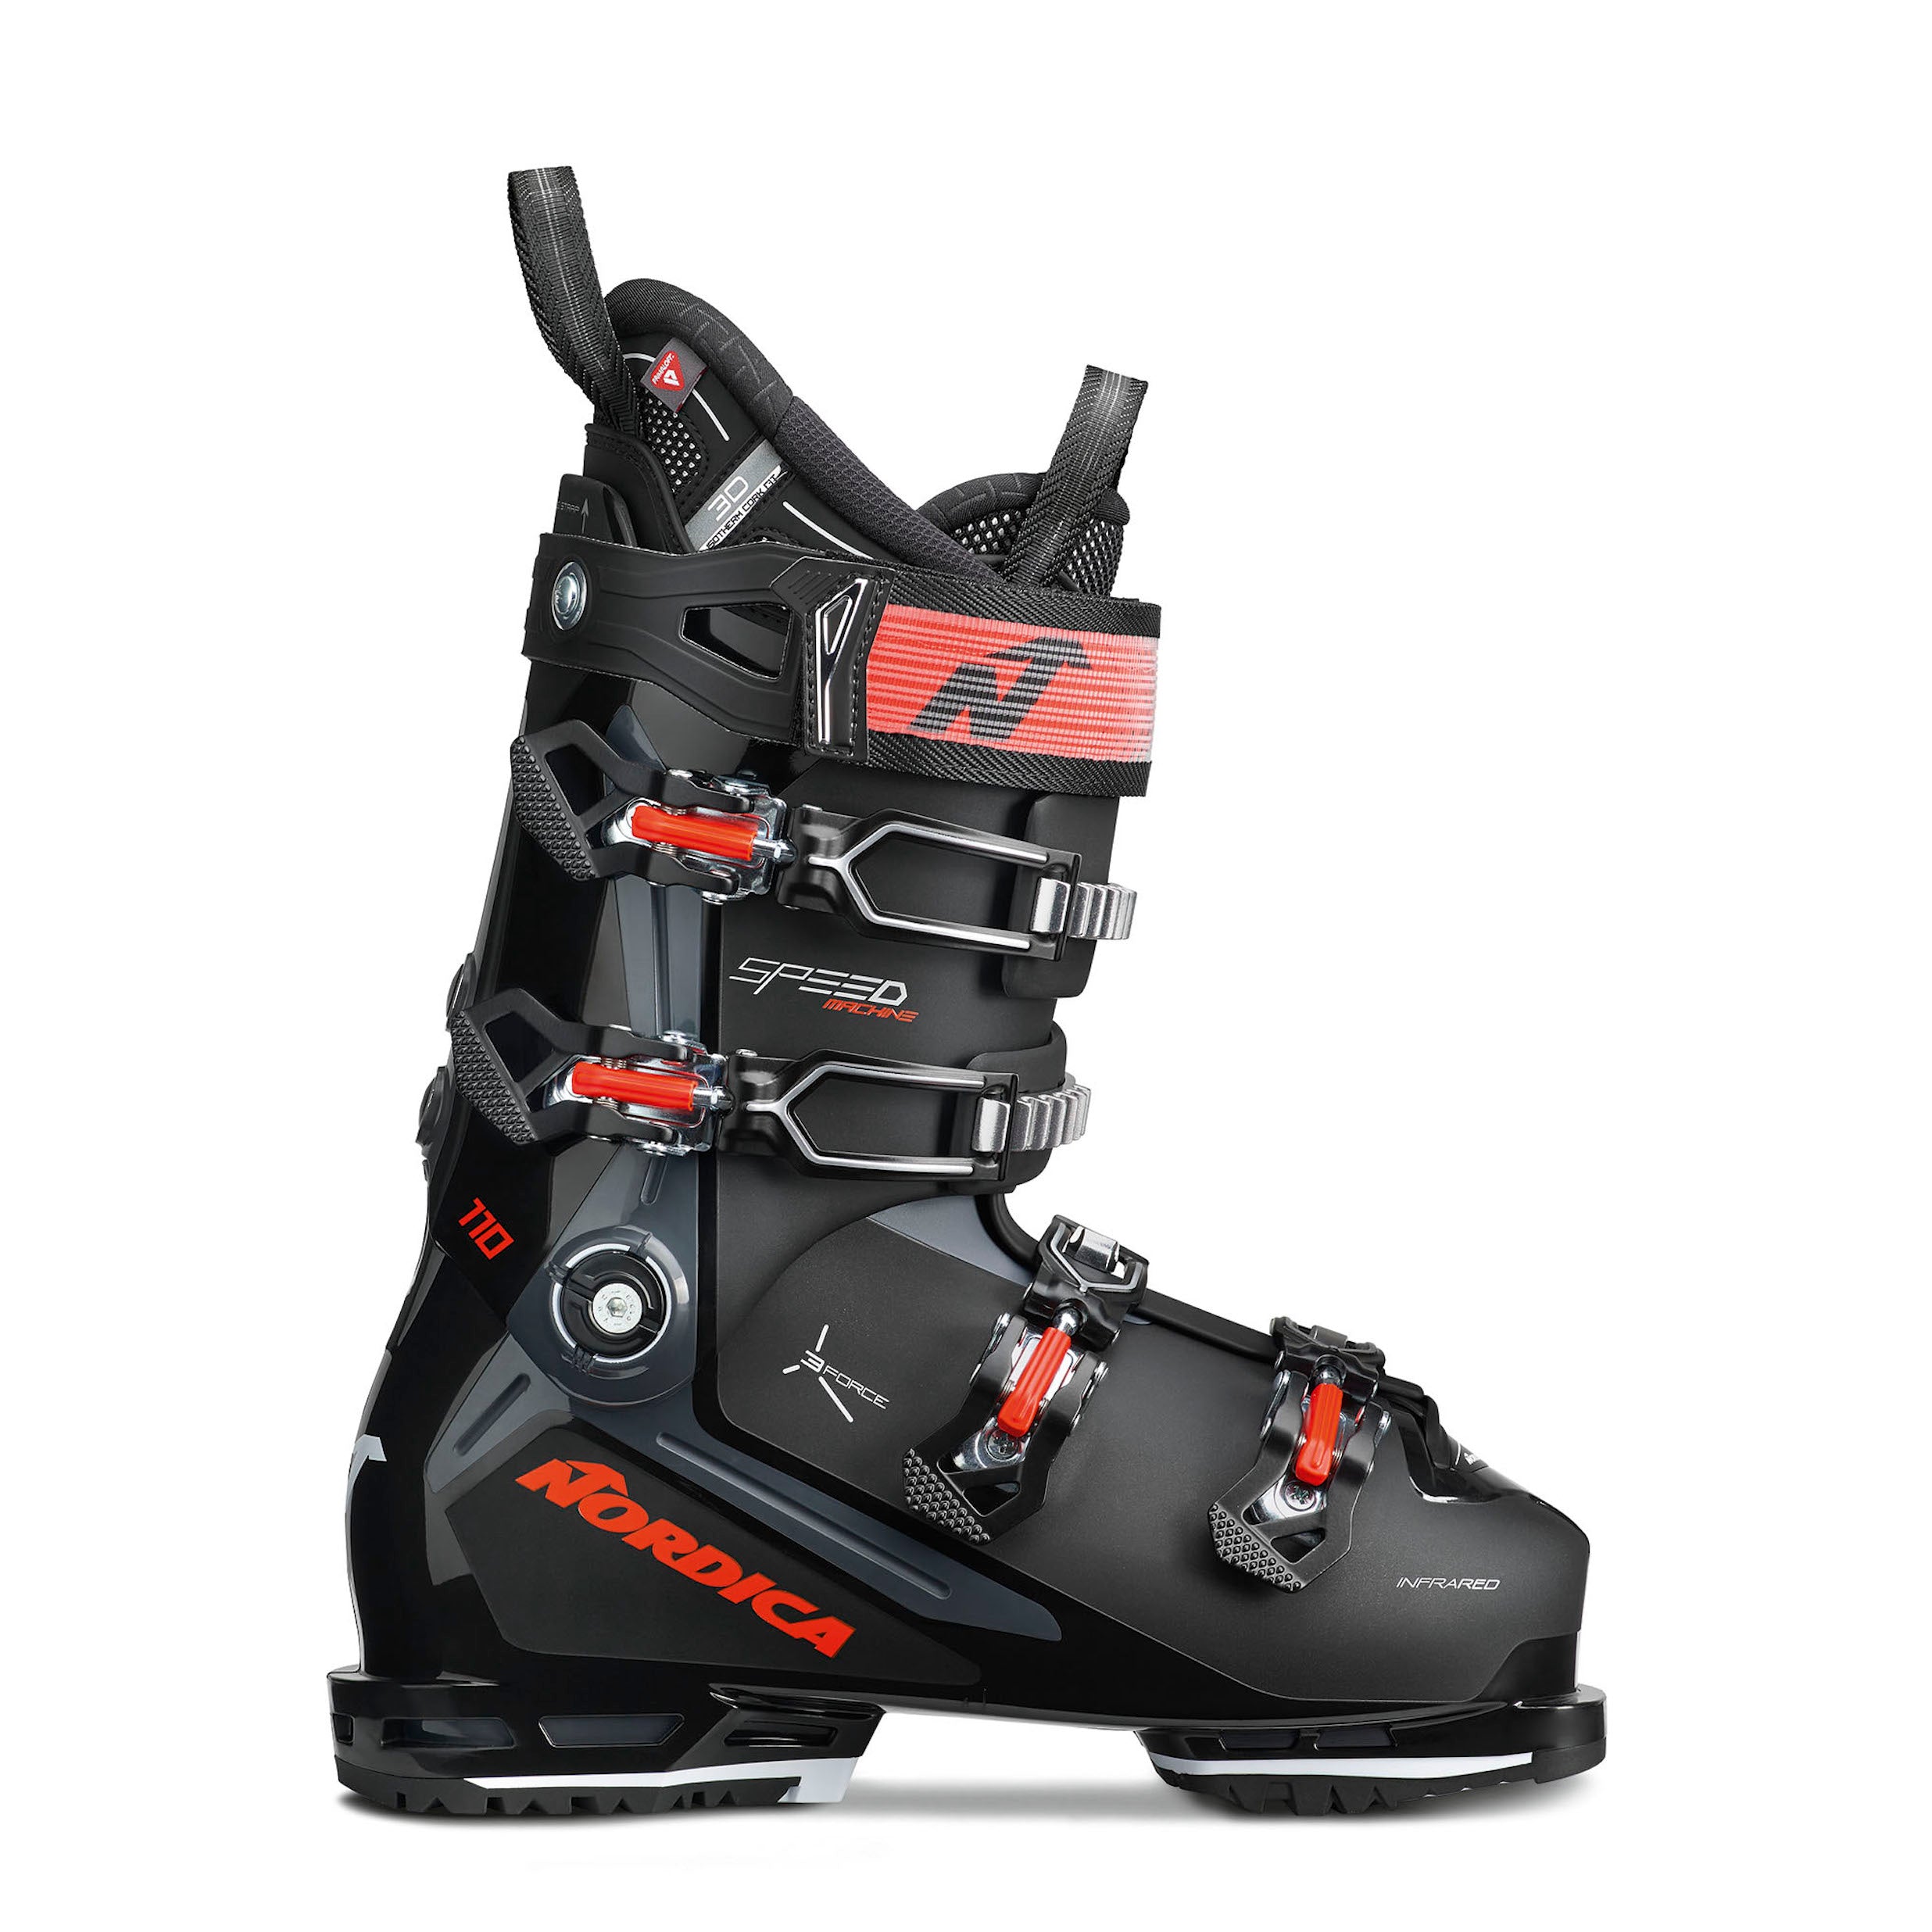 Men's Nordica Speedmachine 3 110 ski boot in black with red accents.